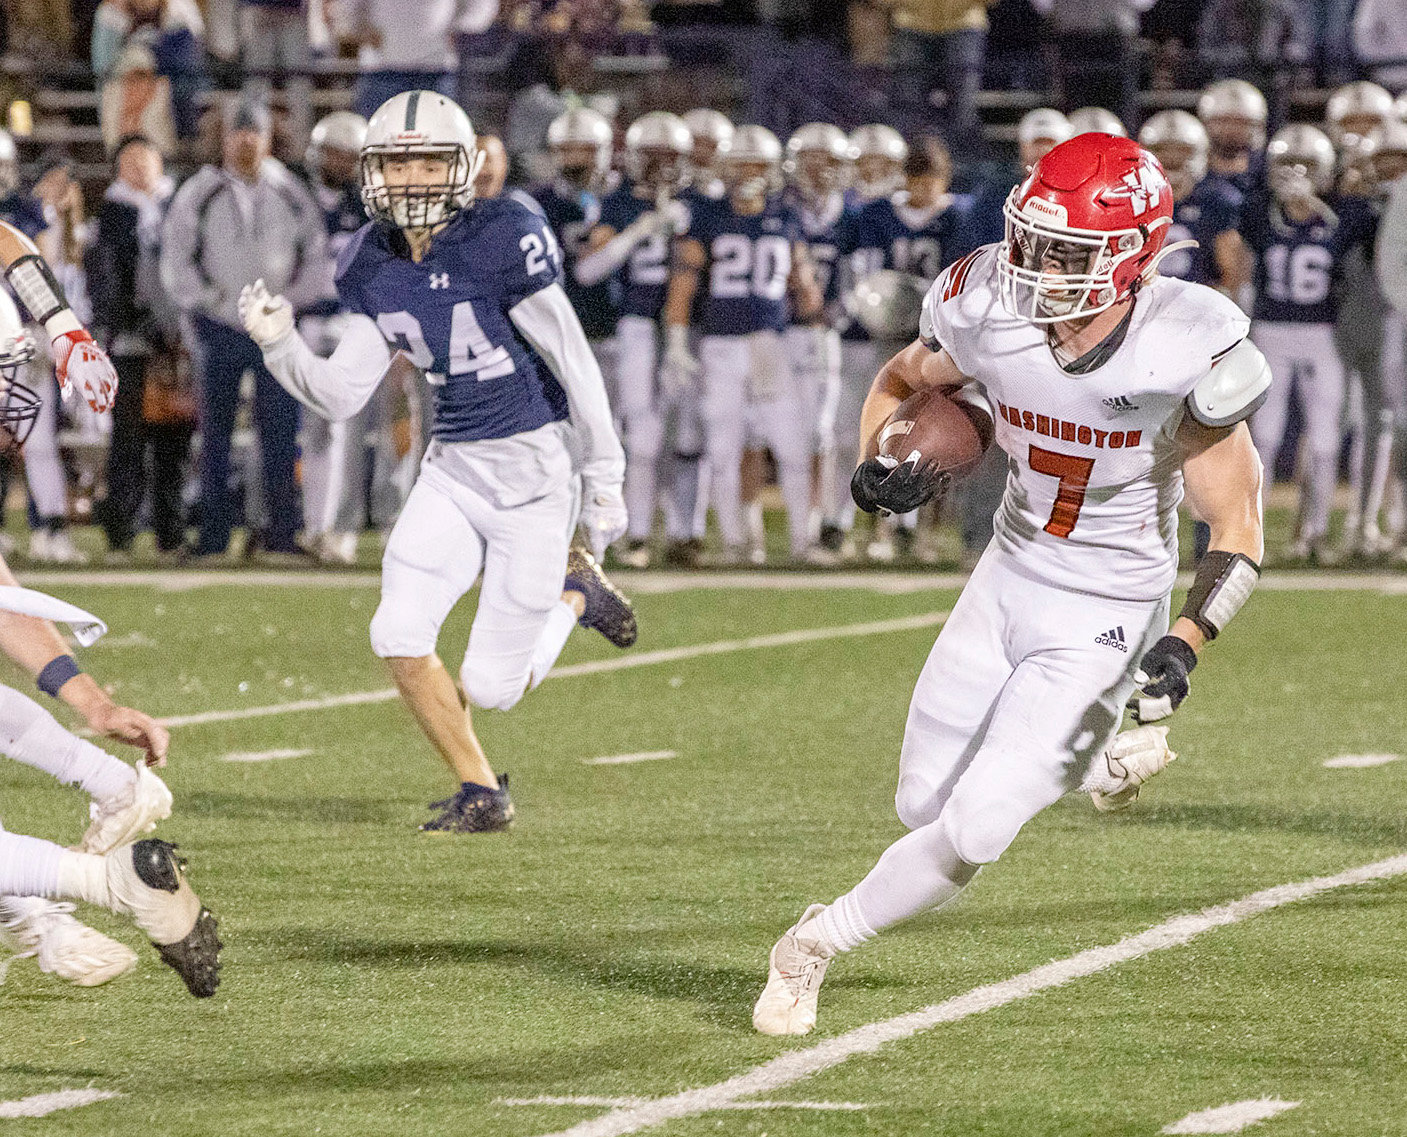 Washington junior Cole Scott runs with the ball Friday night against Marlow in the Class 2A State championship. Washington was defeated 17-13. Scott ran for 218 yards on 32 carries and scored a touchdown.